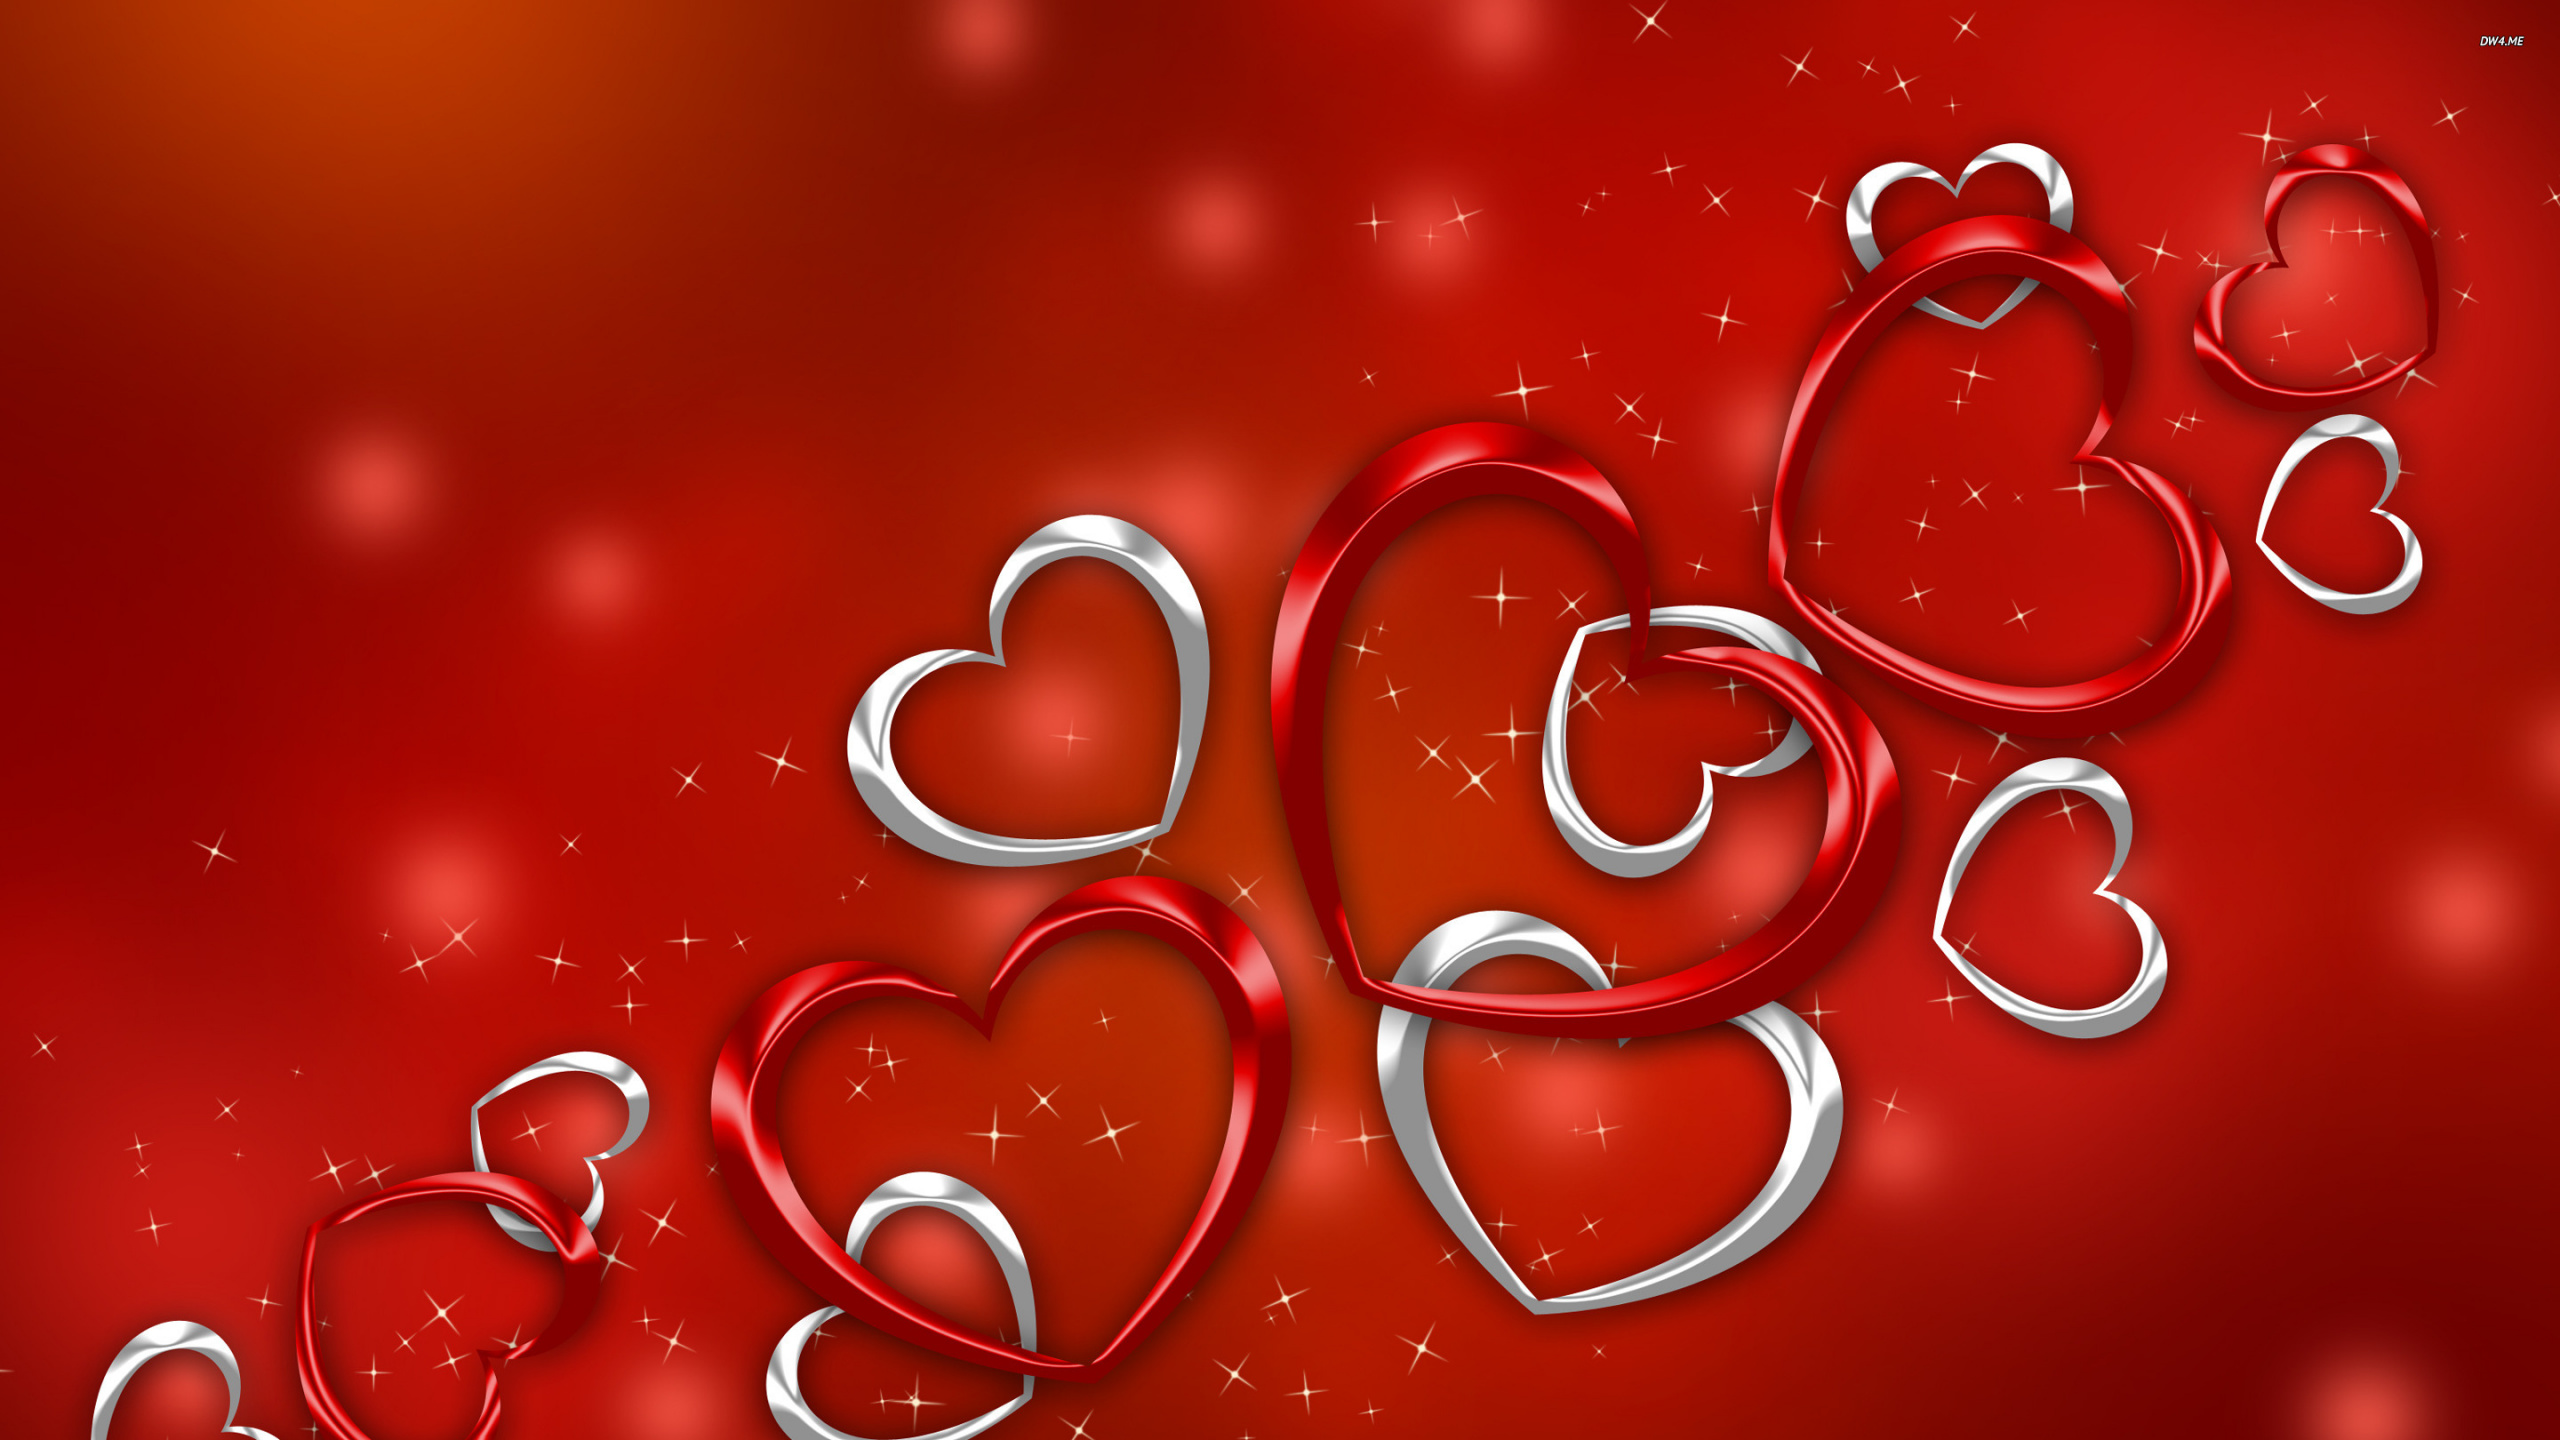 Heart, Valentines Day, Red, Love, Text. Wallpaper in 2560x1440 Resolution